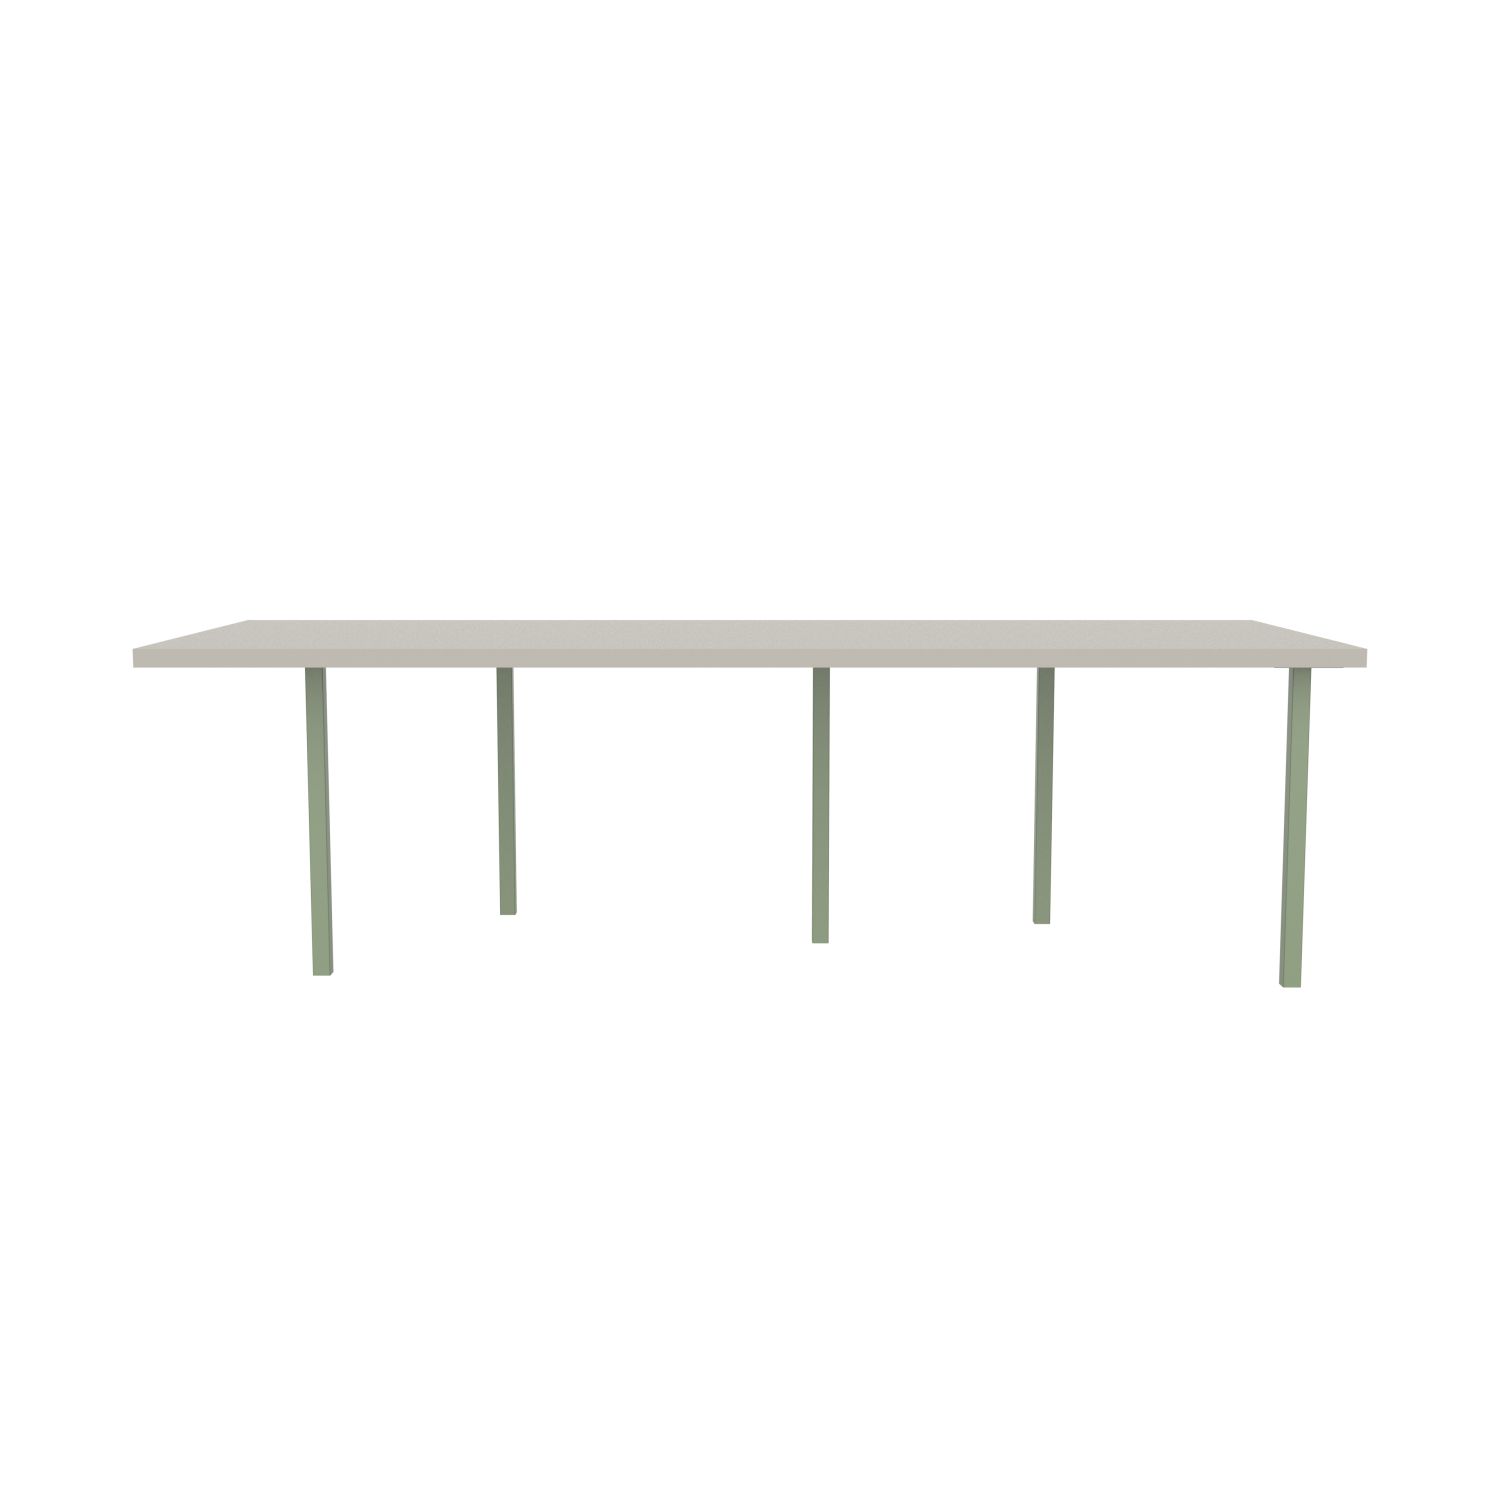 lensvelt bbrand table five fixed heigt 103x264 hpl white 50 mm price level 1 green ral6021